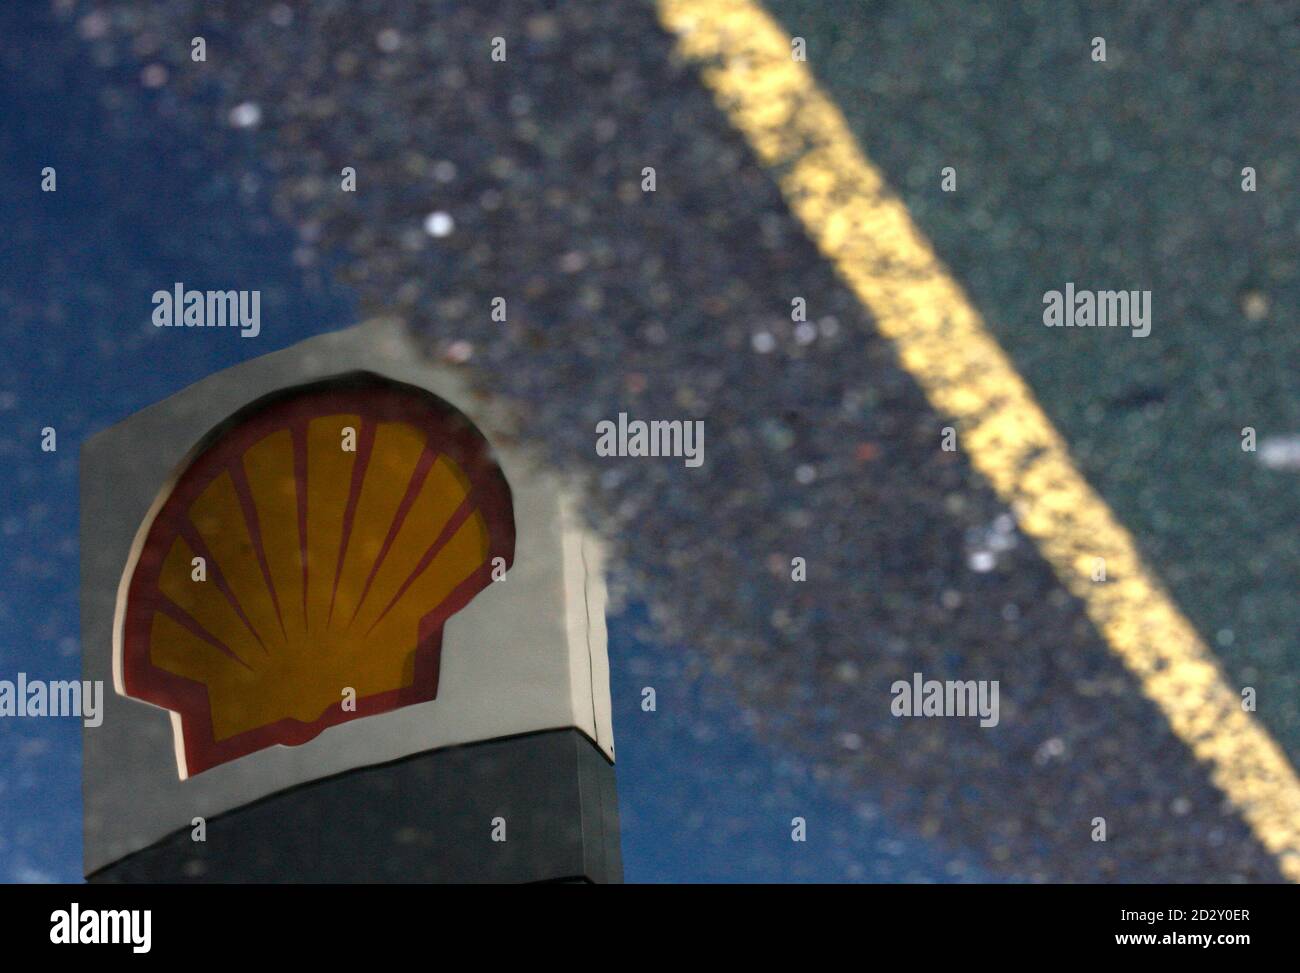 A Shell petrol station sign is reflected in a puddle in London April 28, 2009. Royal Dutch Shell Plc followed an oil industry trend of reporting sharply lower first-quarter profit due to lower crude prices, while outperforming analysts' forecasts.  Shell said its current cost of supply (CCS) net income, which strips out unrealised profits or losses related to changes in the value of inventories, fell 58 percent compared to the same period in 2008, to $3.30 billion. The photograph has been rotated 180 degrees. Picture taken April 28, 2009.    REUTERS/Luke MacGregor    (BRITAIN TRANSPORT BUSINES Stock Photo